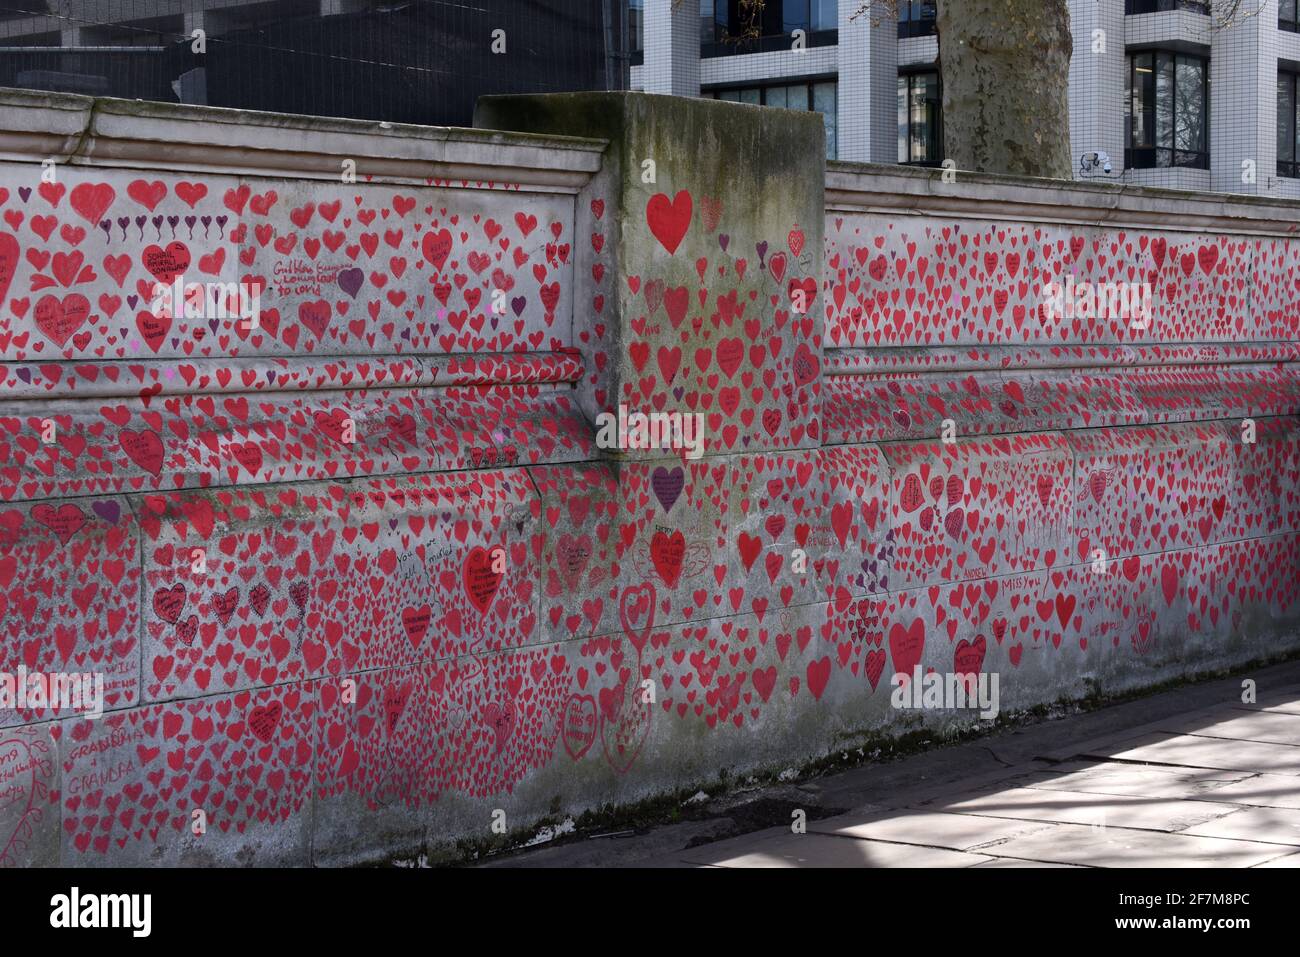 London, April 2021: The National Covid Memorial Wall outside St Thomas' Hospital on the Albert Embankment path by the River Thames in London Stock Photo